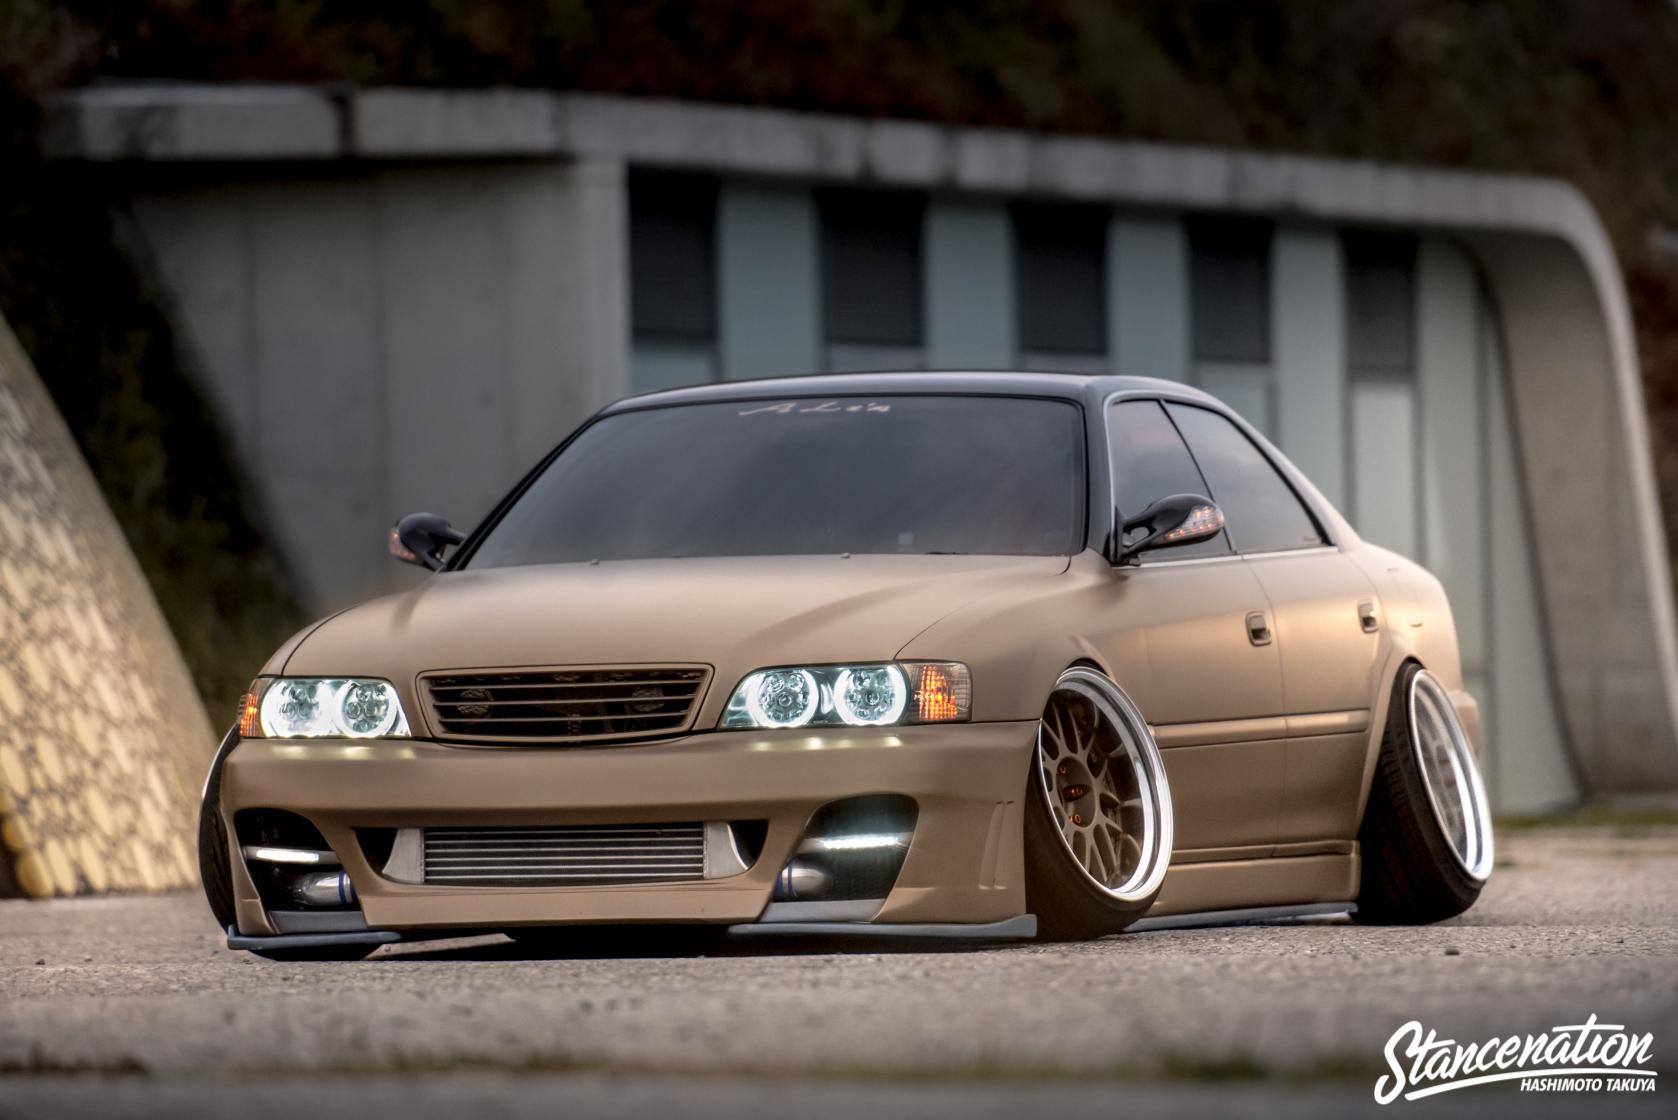 Toyota Chaser Wallpaper HD 25 X 1120. Wall